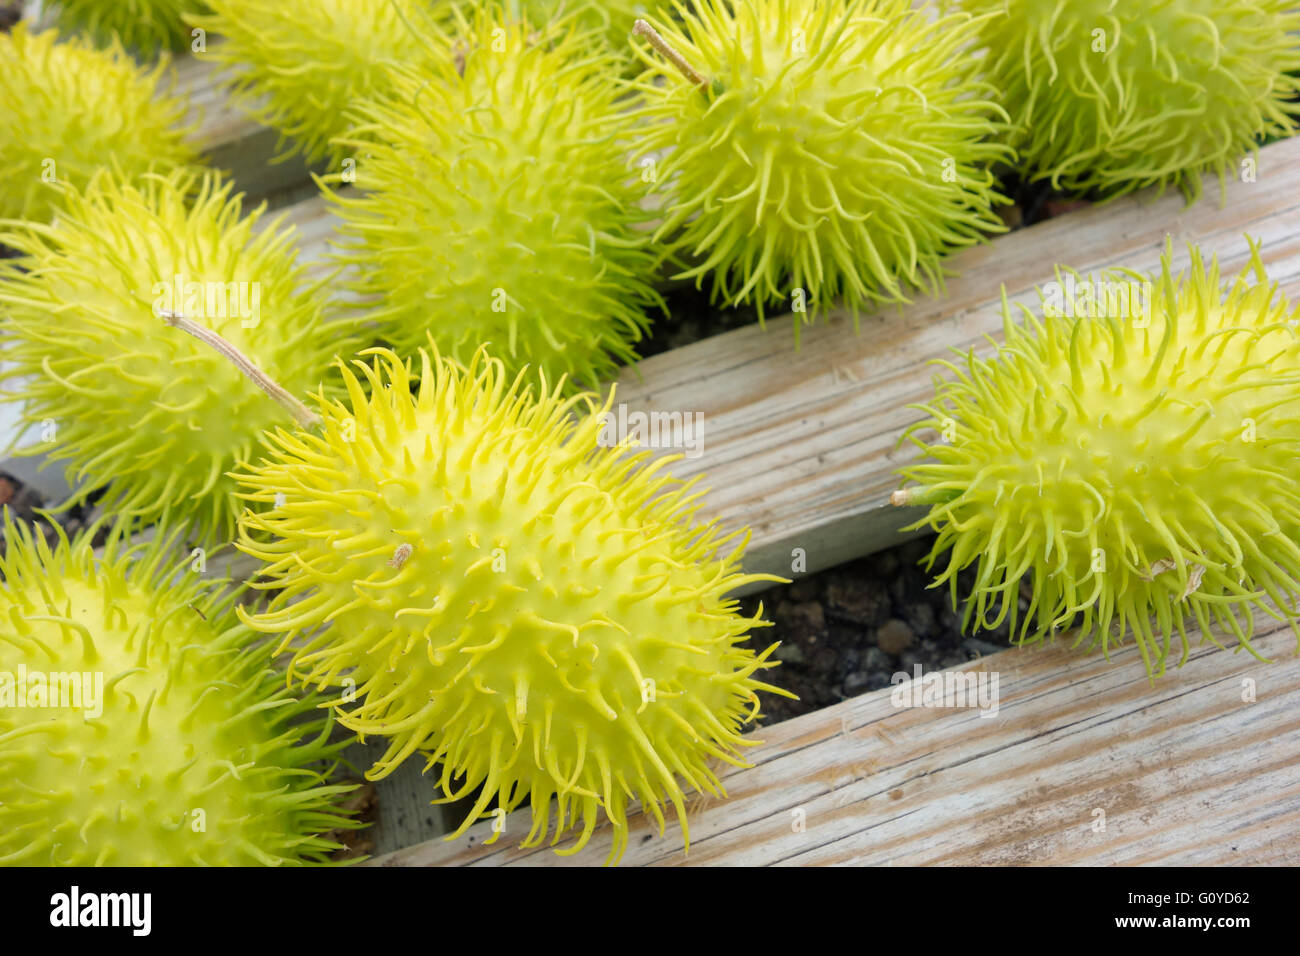 Cucumber, wild, Cucumis, Cucumis africanus, Africa indigenous, Annual, Beauty in Nature, Climber, Colour, Creative, Crops, Summer Flowering, Food & Drink, Food and drink, Fresh, Frost tender, Summer Fruiting, Green Rambutans, Growing, Outdoor, Plant, Spiky, Vegetable, Wild plant, Green, Stock Photo